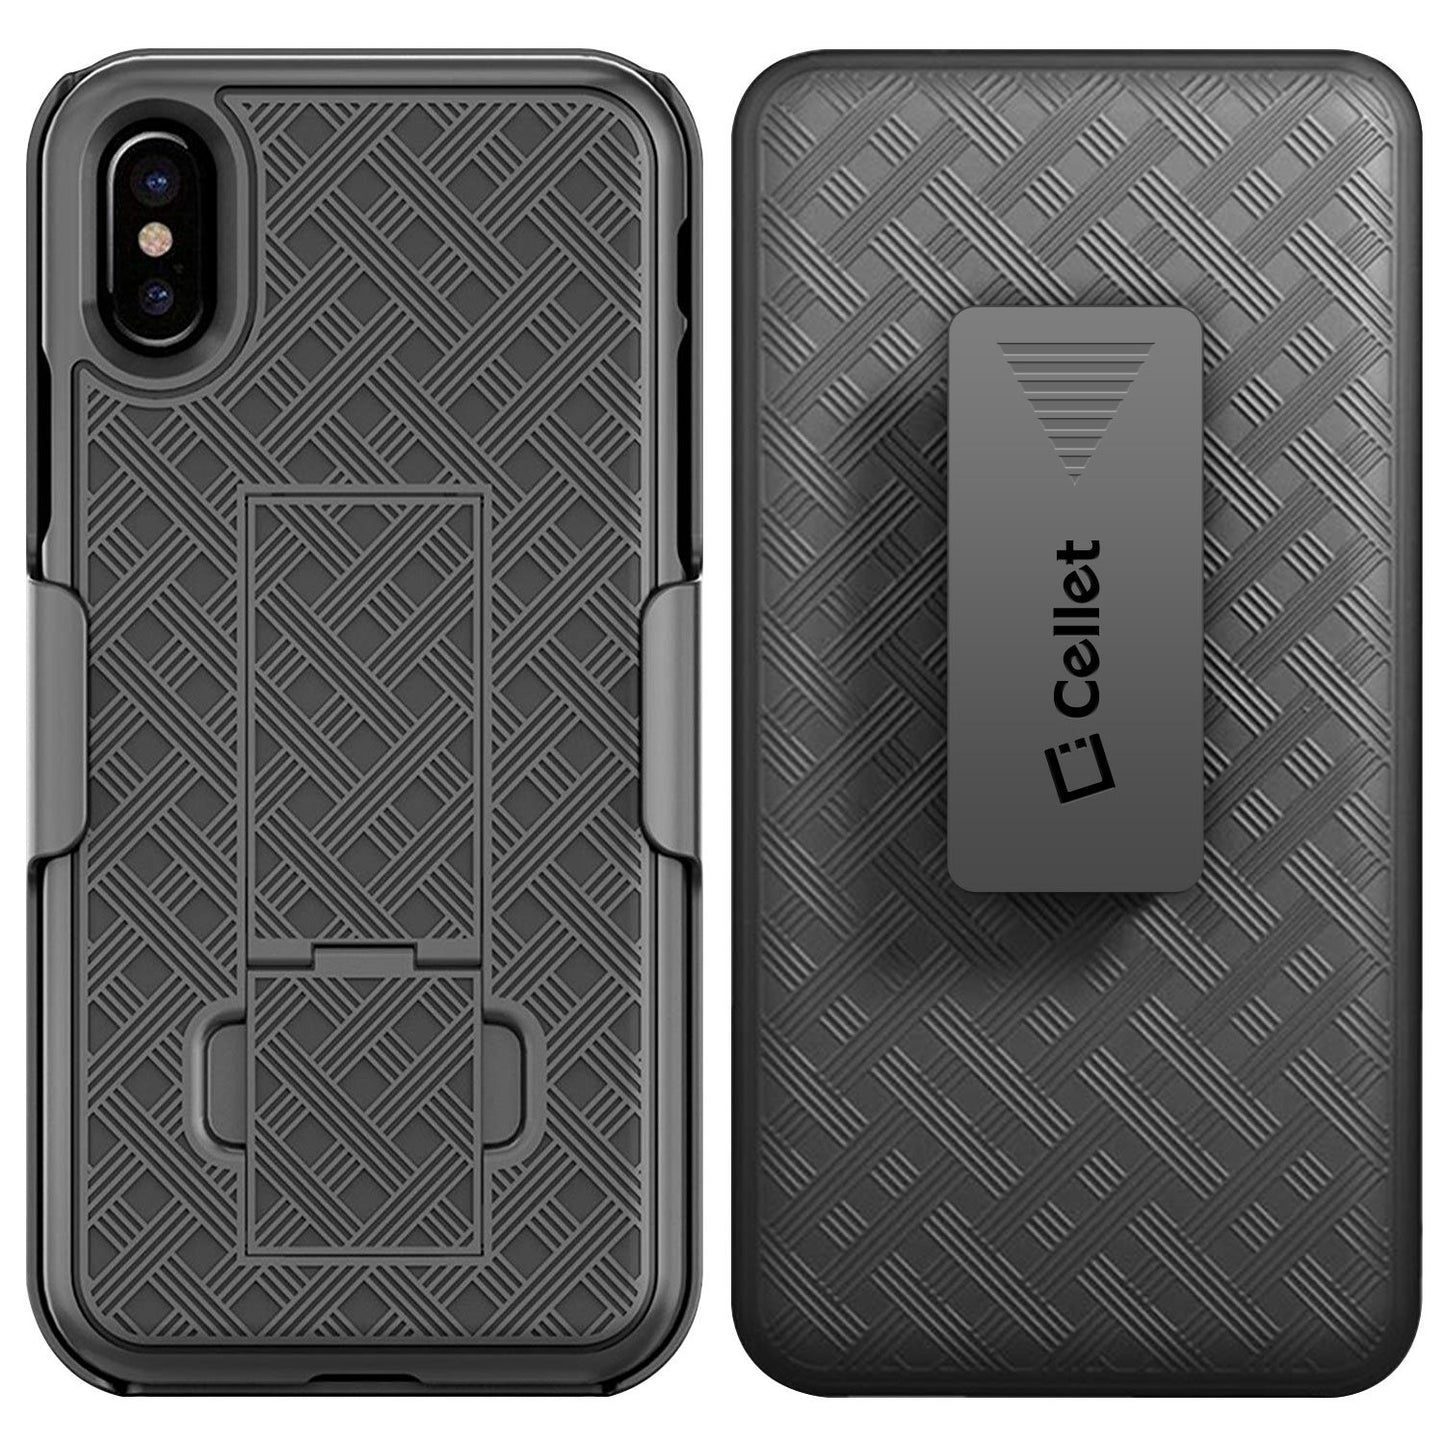 HLIPHXSM- iPhone XS Max Belt Clip Holster & Shell Case with Kickstand Heavy Duty Protection